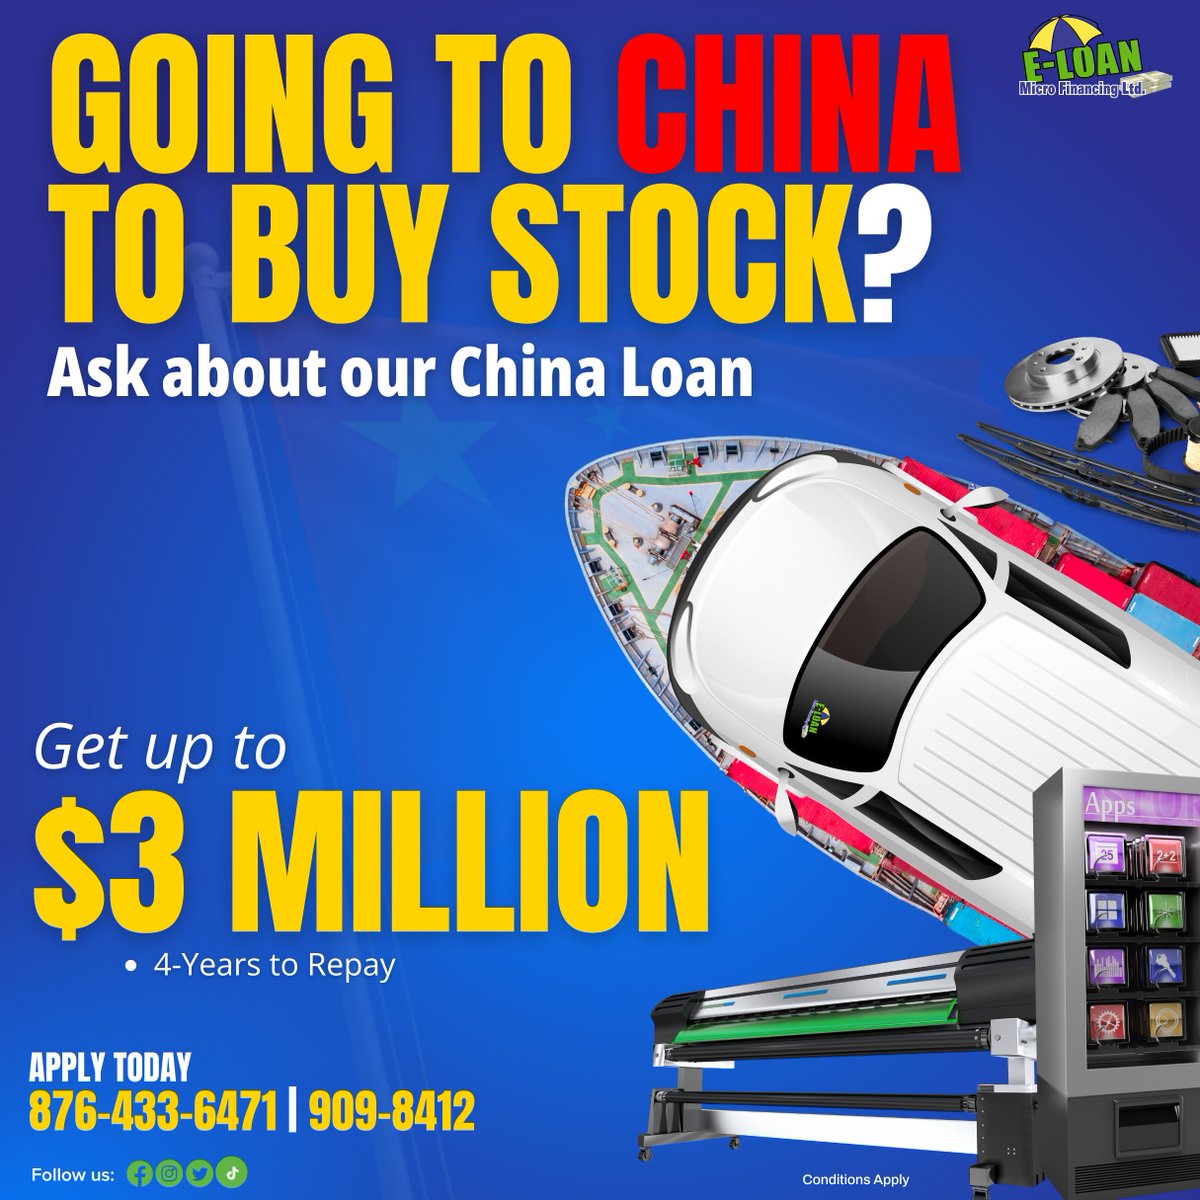 Expand your business horizons with our China Loan! Up to $3 million, 4 years to repay. Contact E-Loan MF Limited now! 🌏💼

#BusinessExpansion #ChinaLoan #EloanMfLimited #Eloan876 #BusinessLoans #JamaicaBusinessLoans